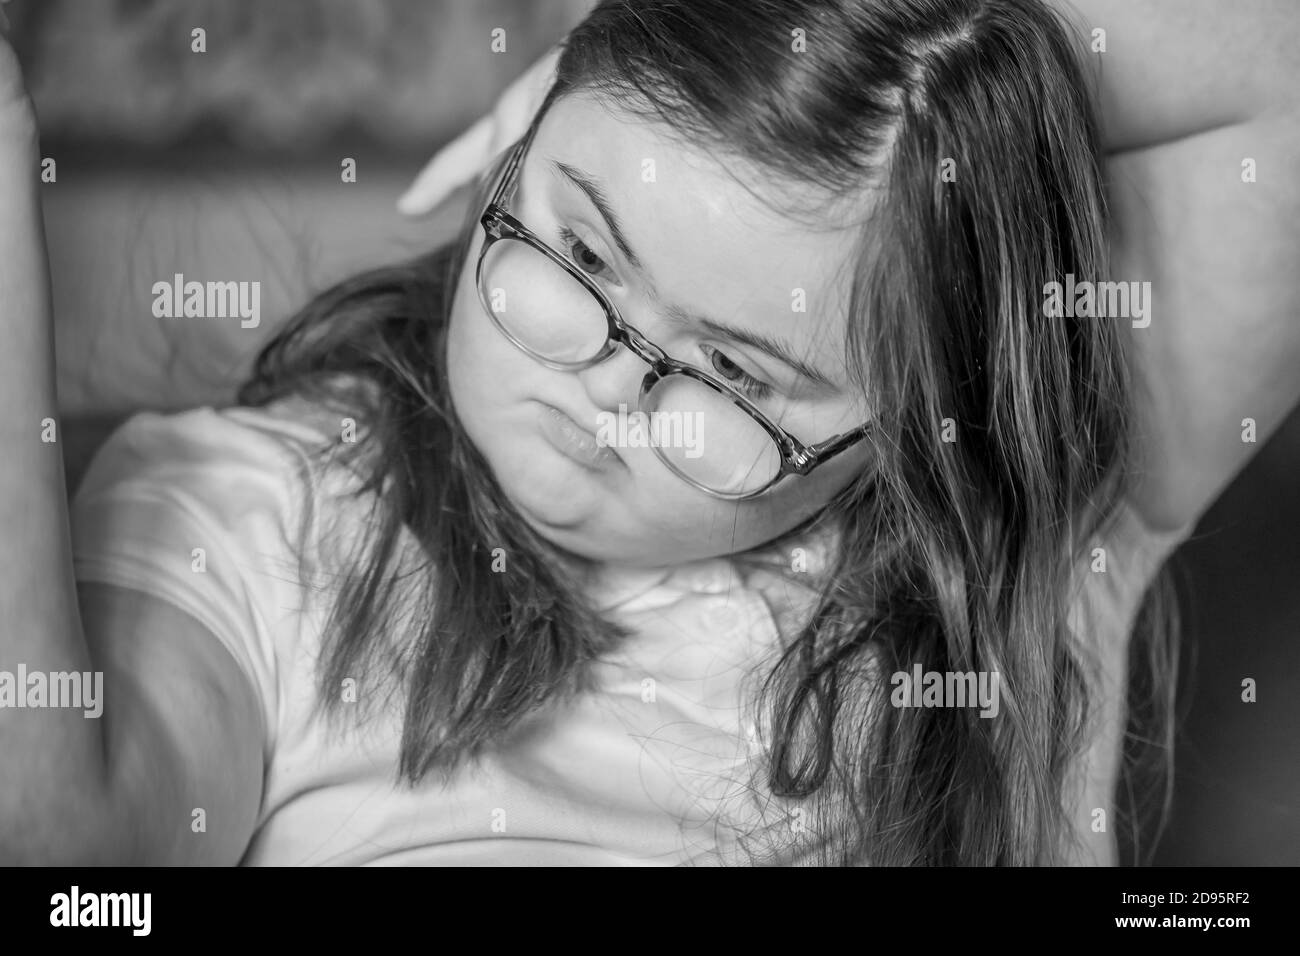 Young female teenage with Downs Syndrome brushing her hair indoors, Northampton, England, UK. Stock Photo